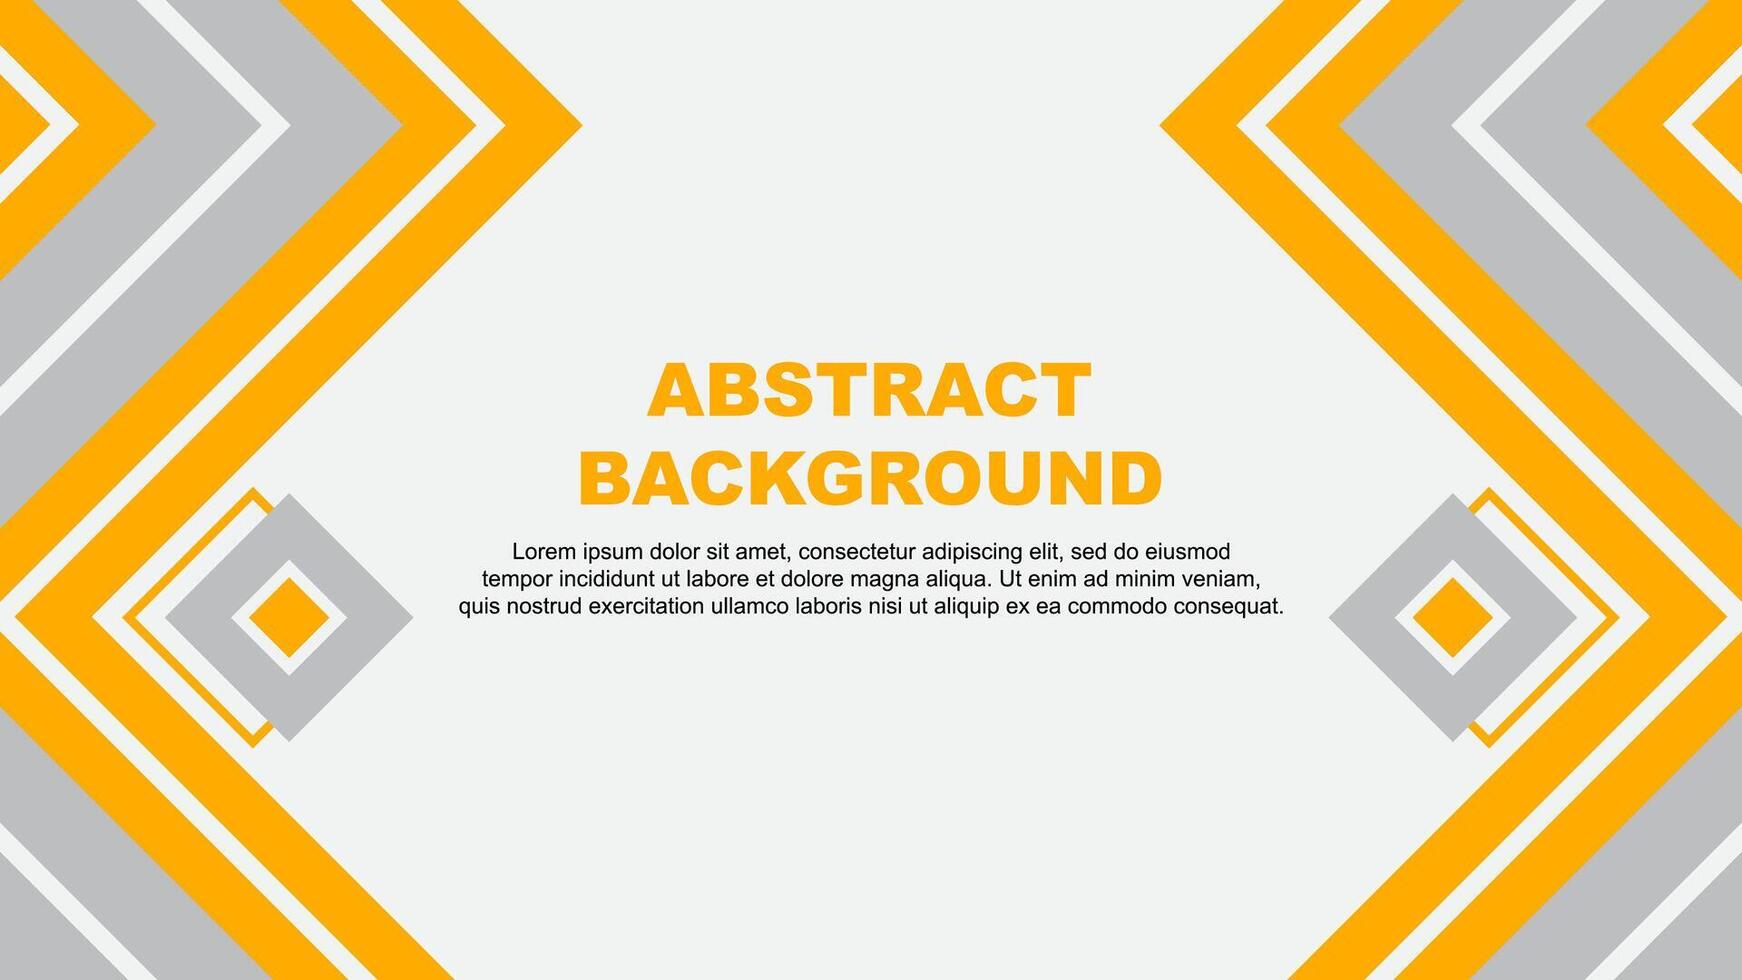 Abstract Background Design Template. Banner Wallpaper Illustration. Amber Yellow Design vector